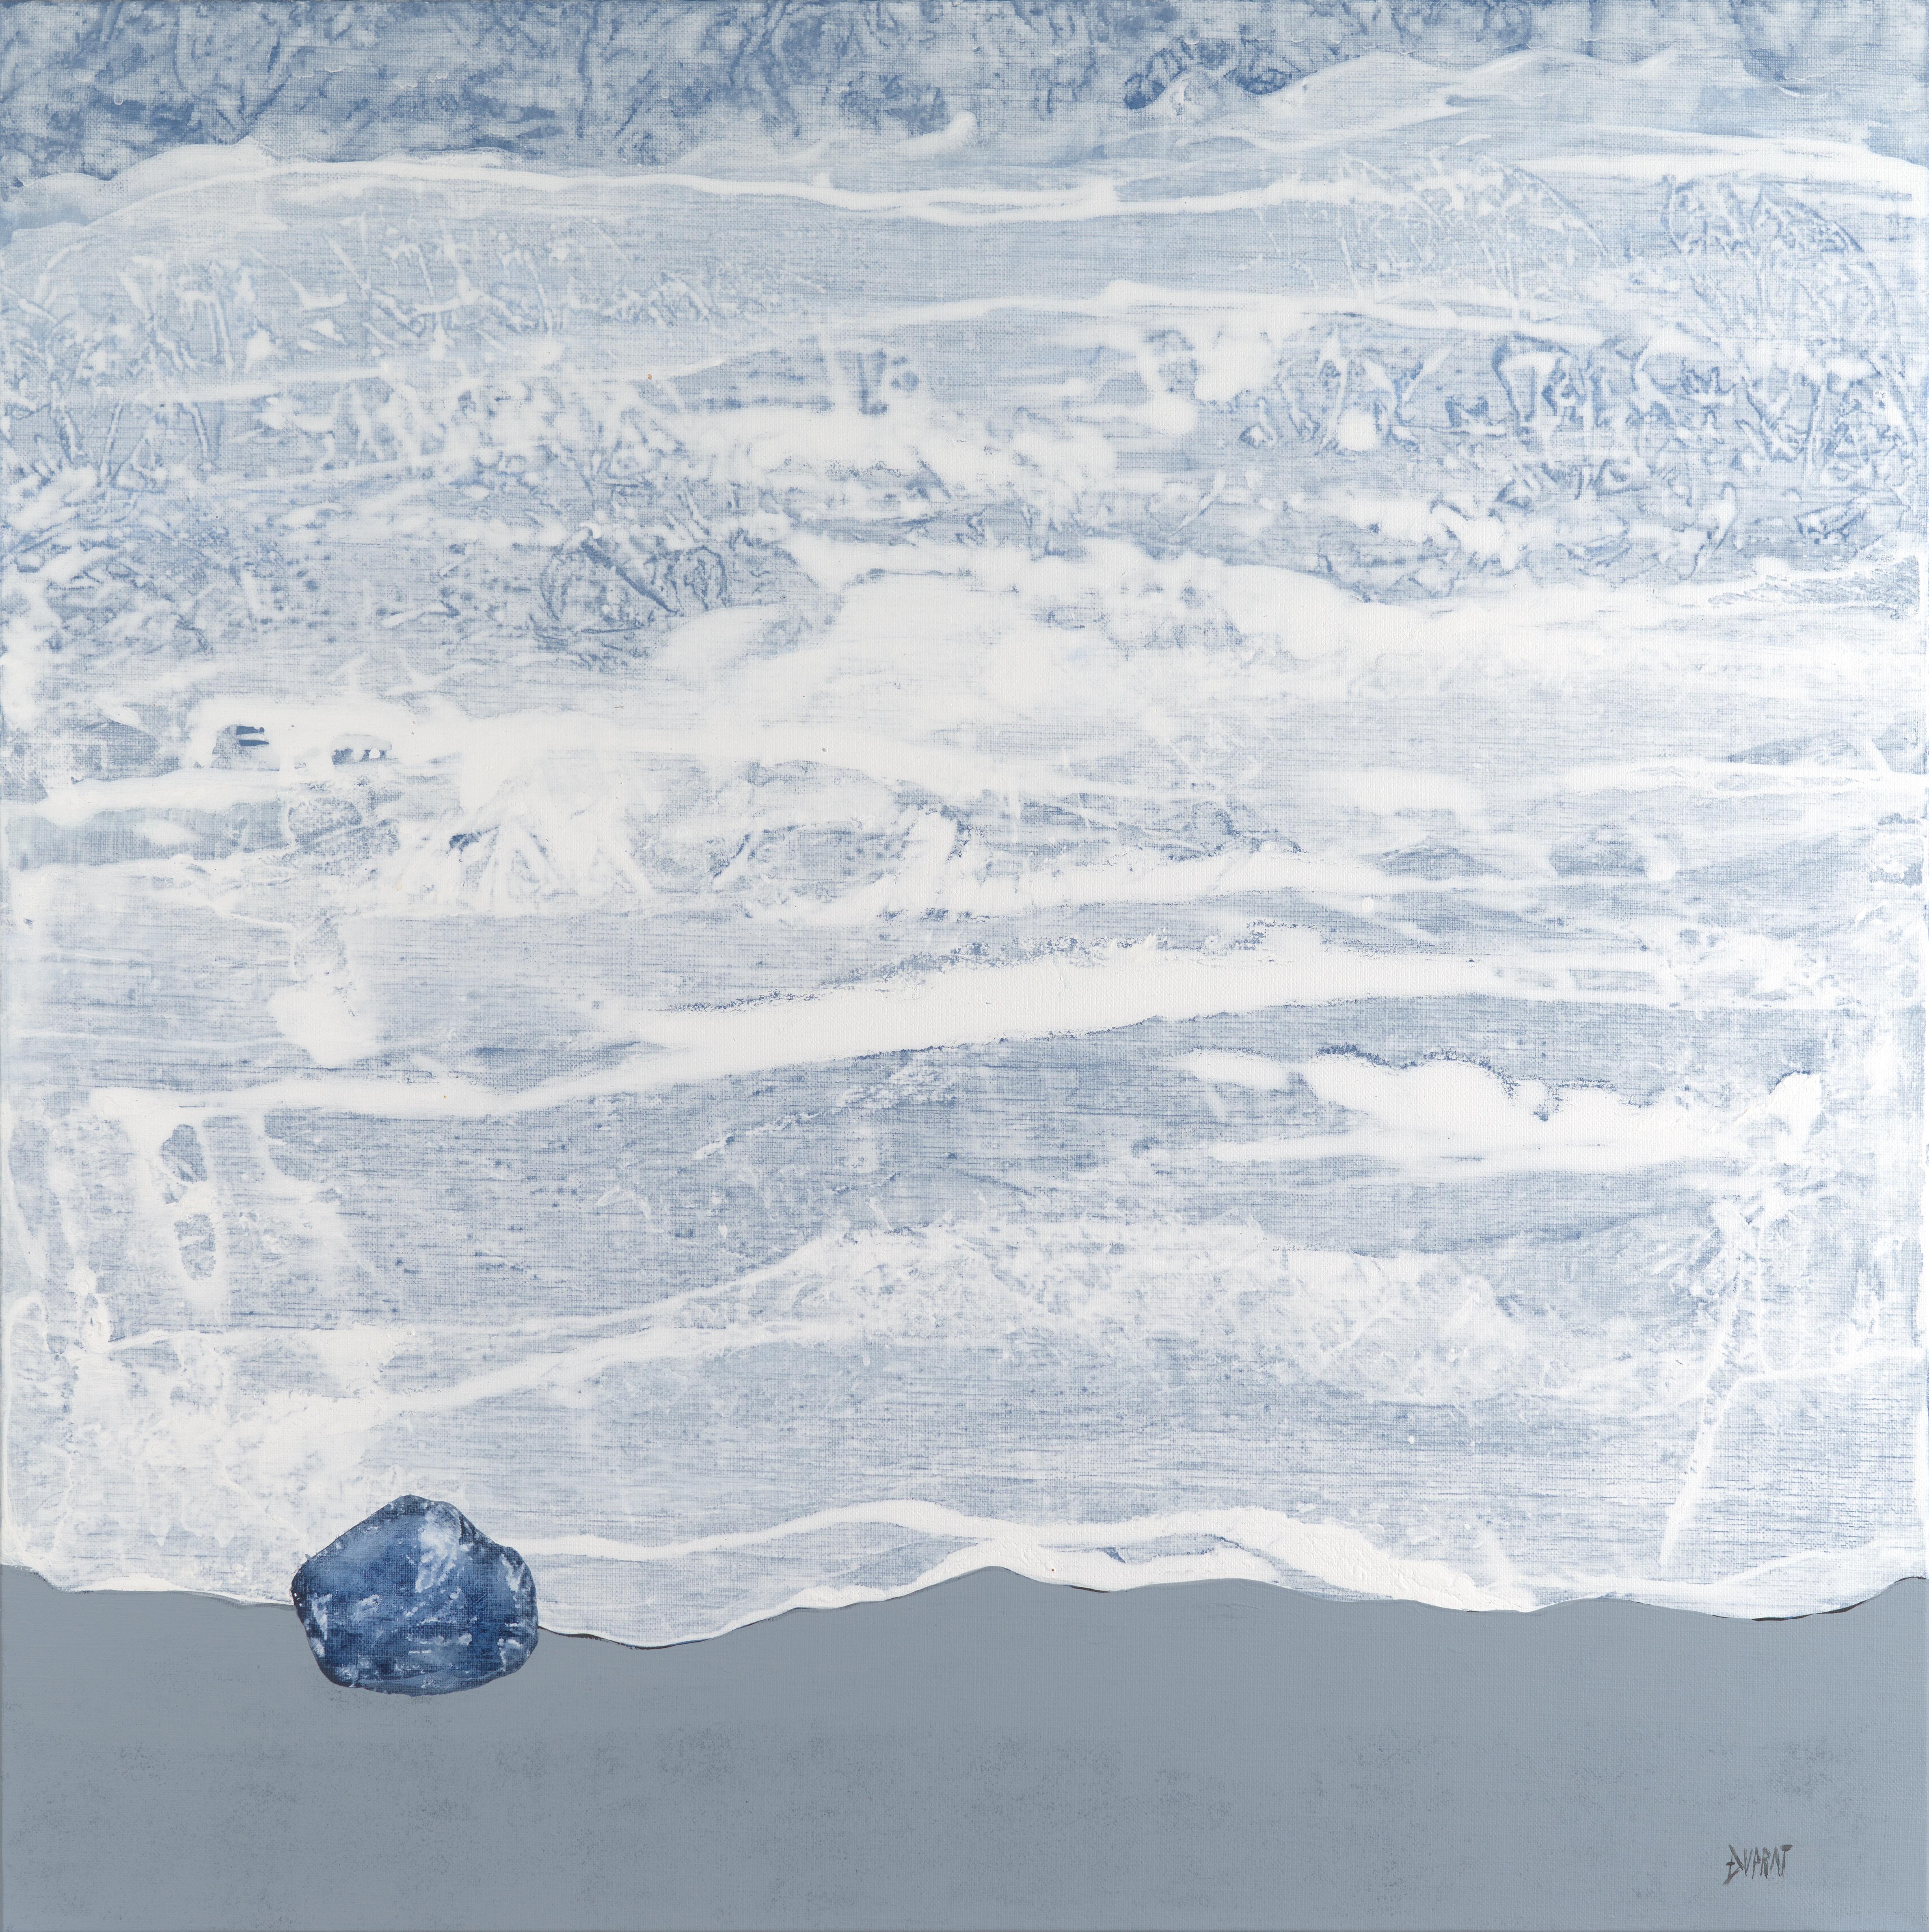 Françoise Duprat Abstract Painting - "Blue Pebble", Grey & White Abstract Marine Landscape Acrylic Painting